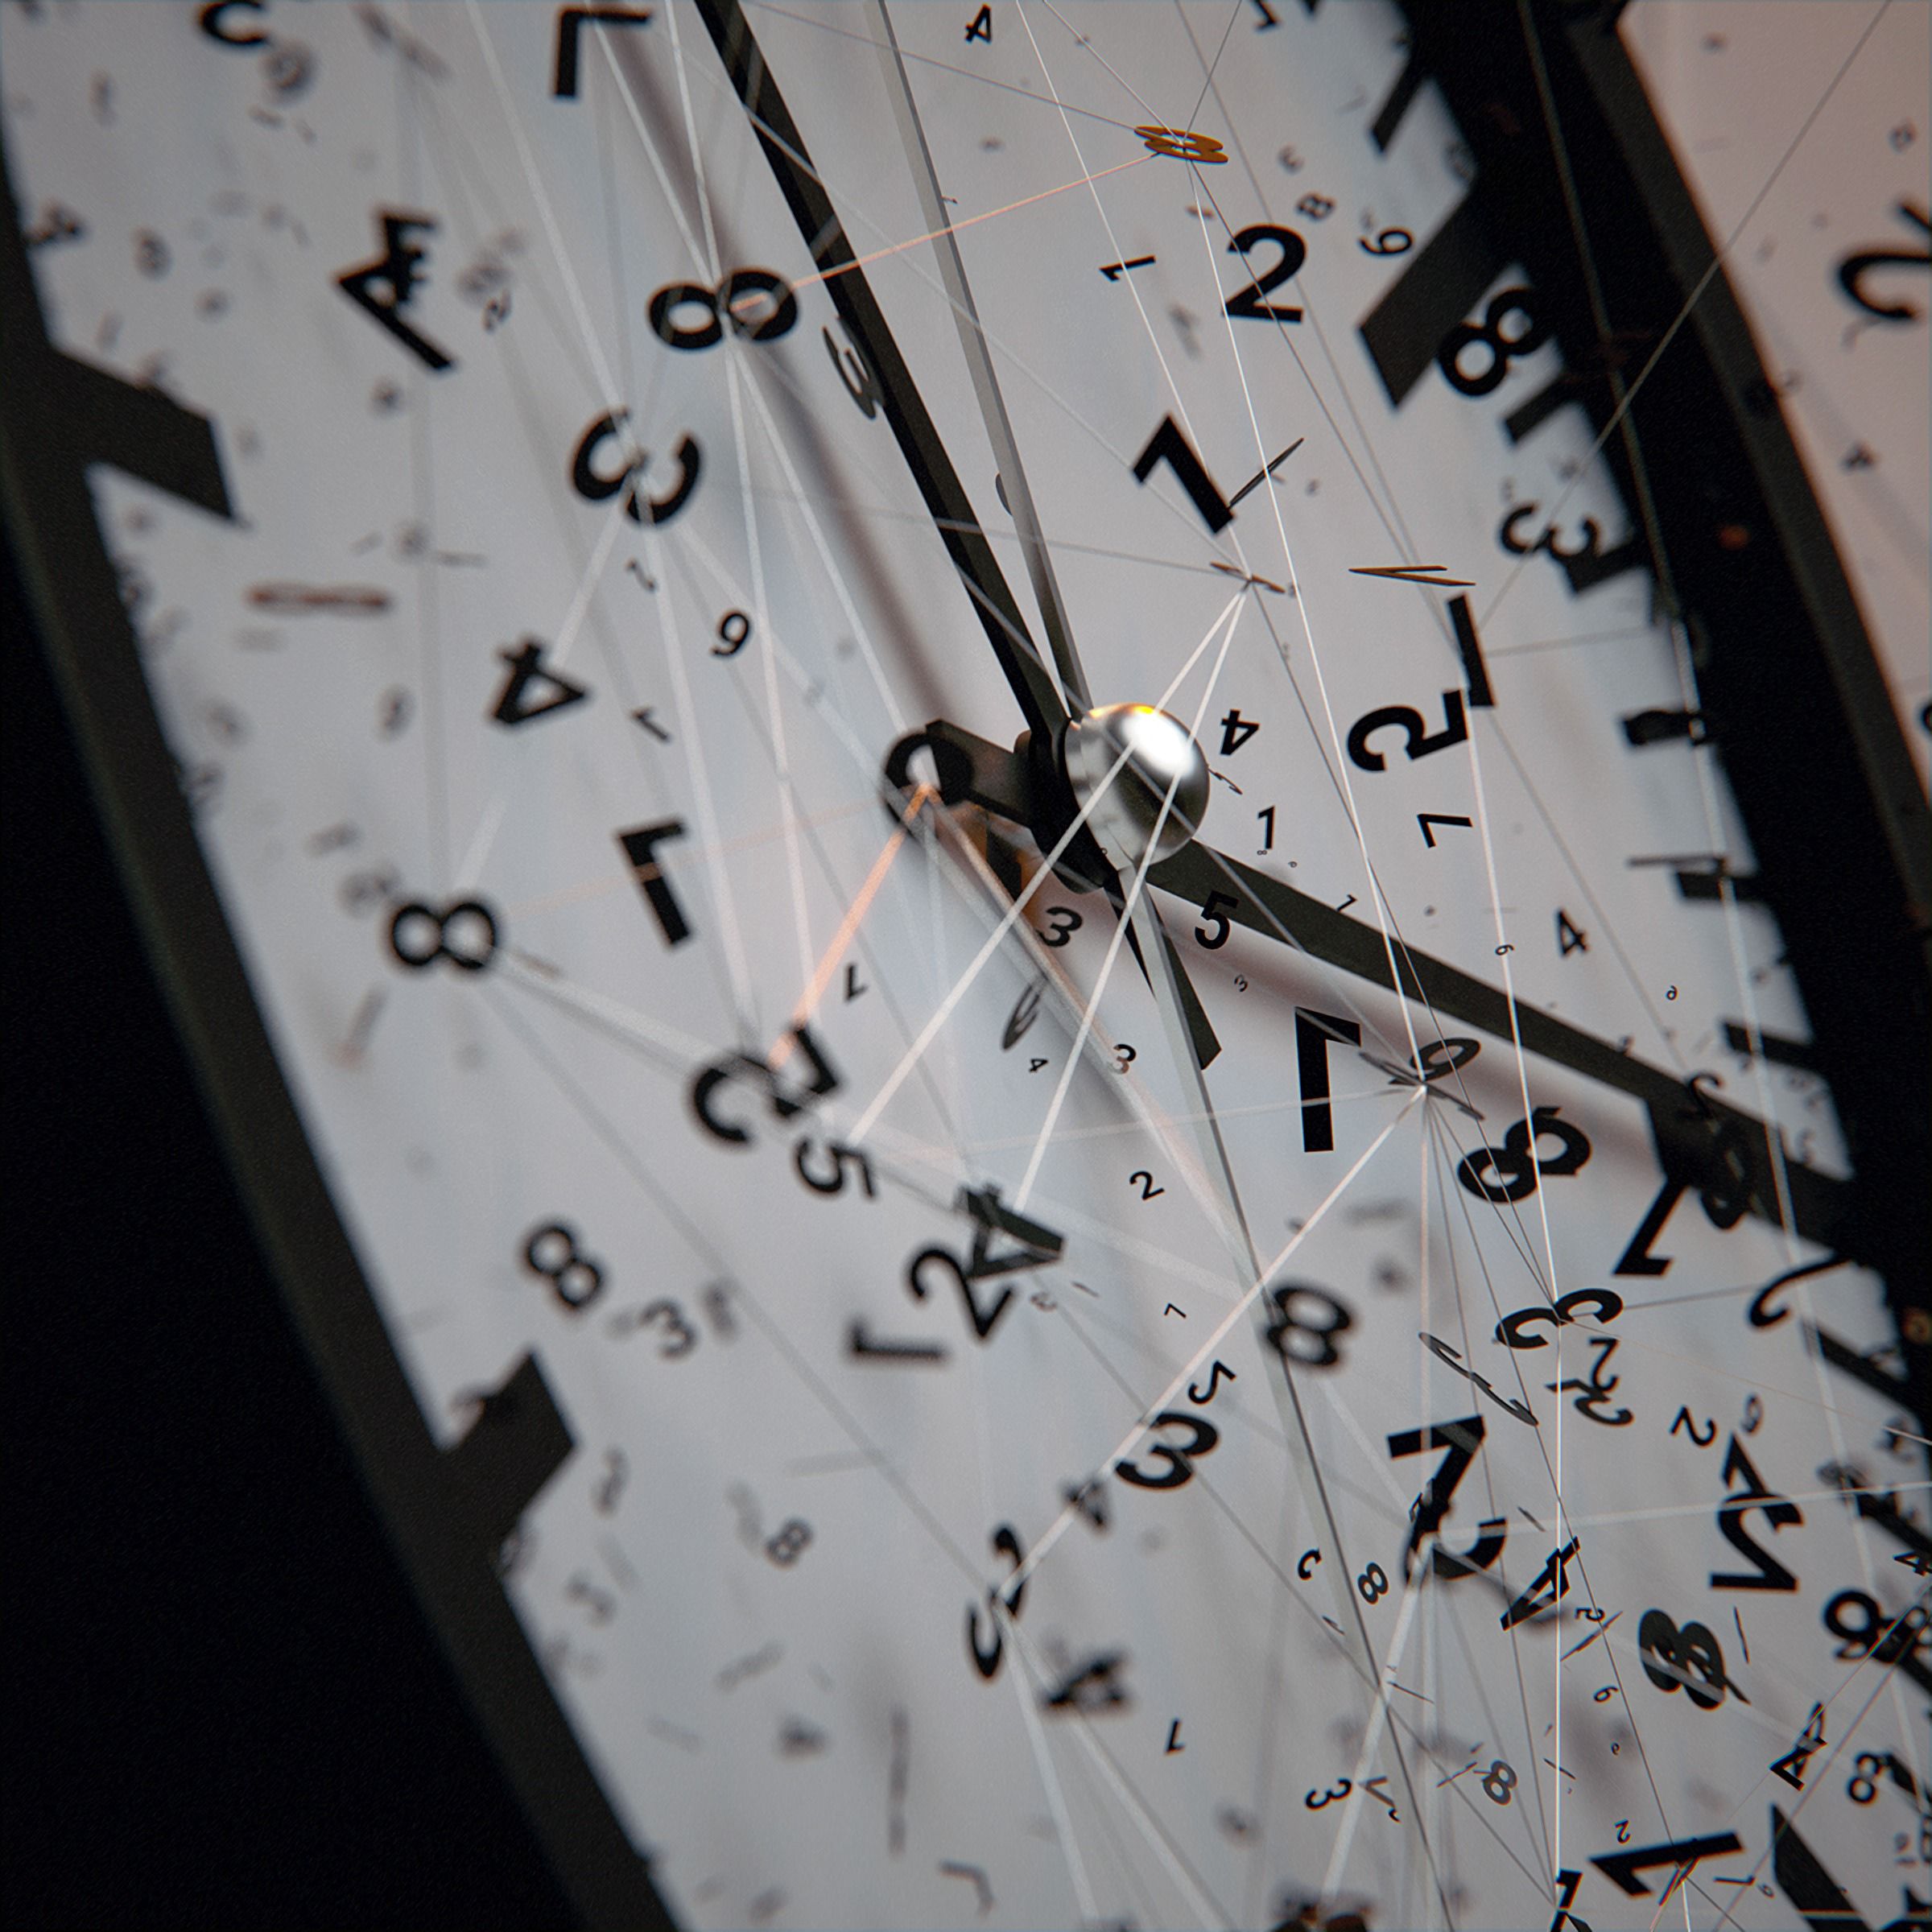 miscellanea, numbers, clock face, clock, dial, intricate, miscellaneous, lines, confused, arrows Free Stock Photo